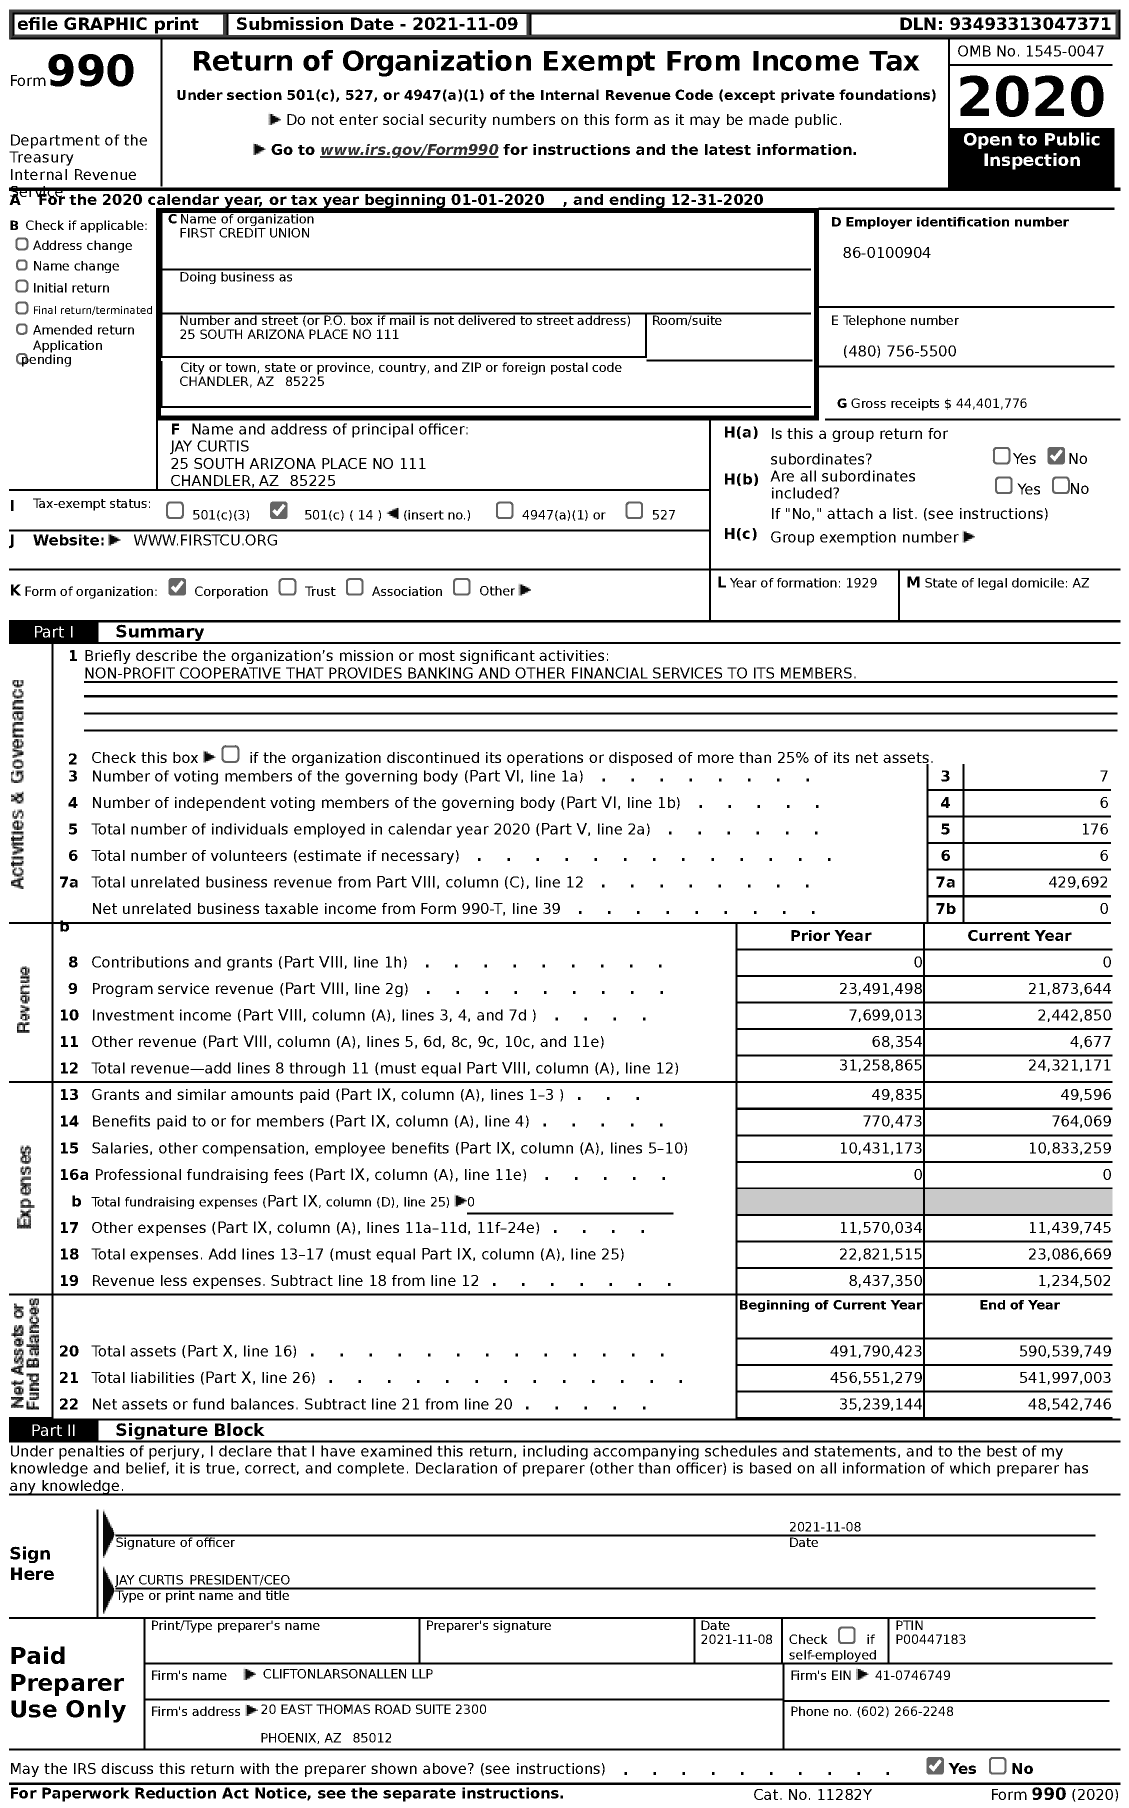 Image of first page of 2020 Form 990 for First Credit Union (FCU)